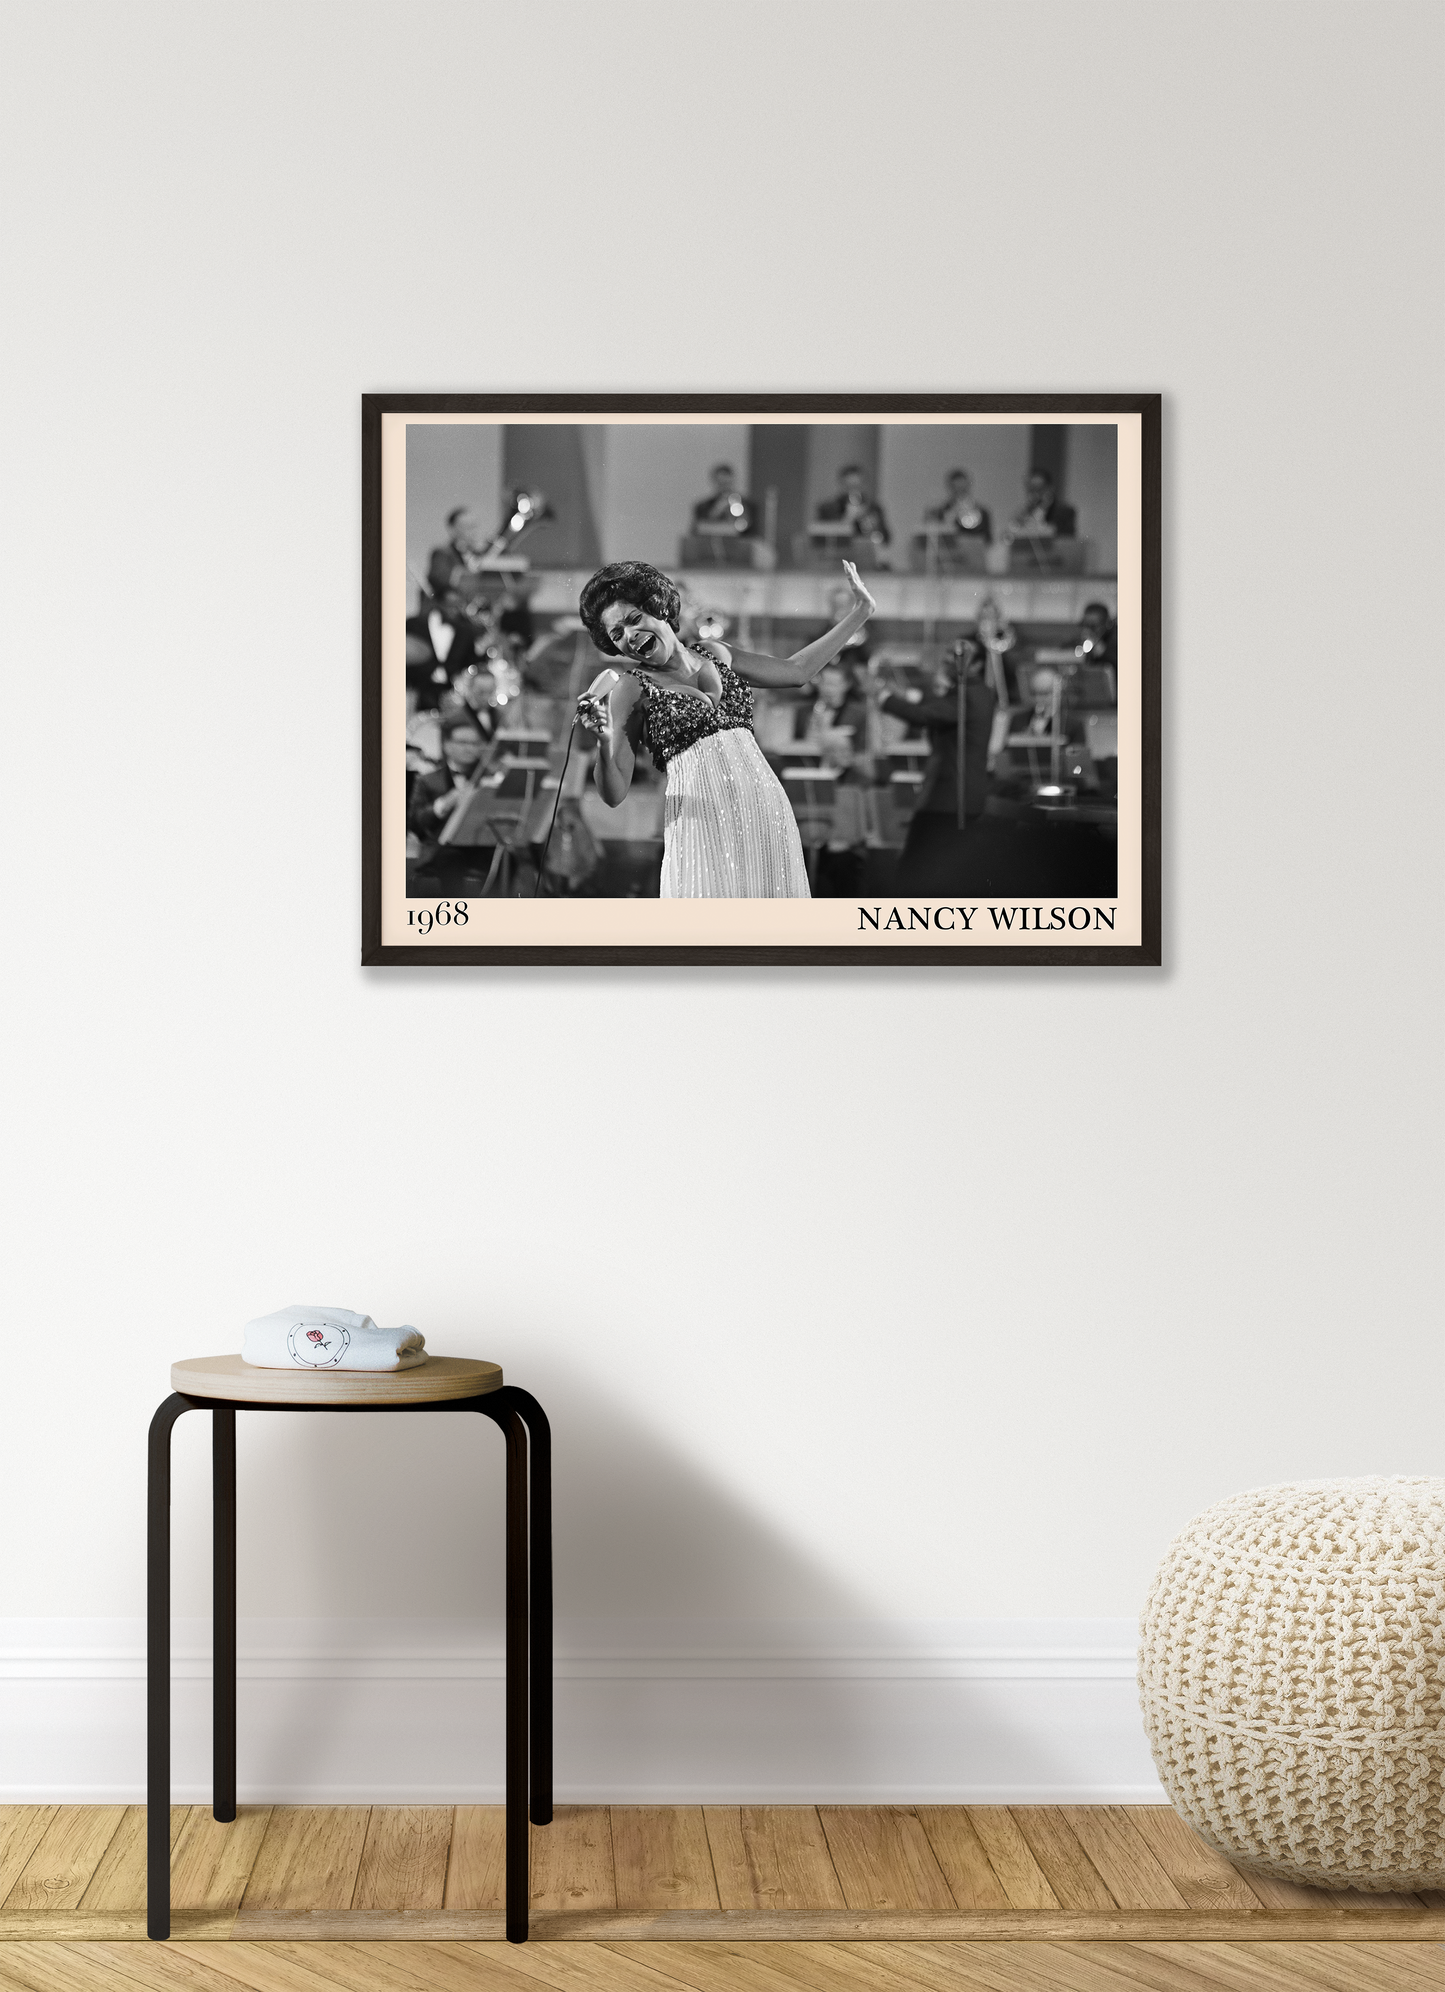 1968 picture of Nancy Wilson singing. Picture crafted into a retro black framed jazz print, with an off-white border. Poster is hanging on a grey living wall